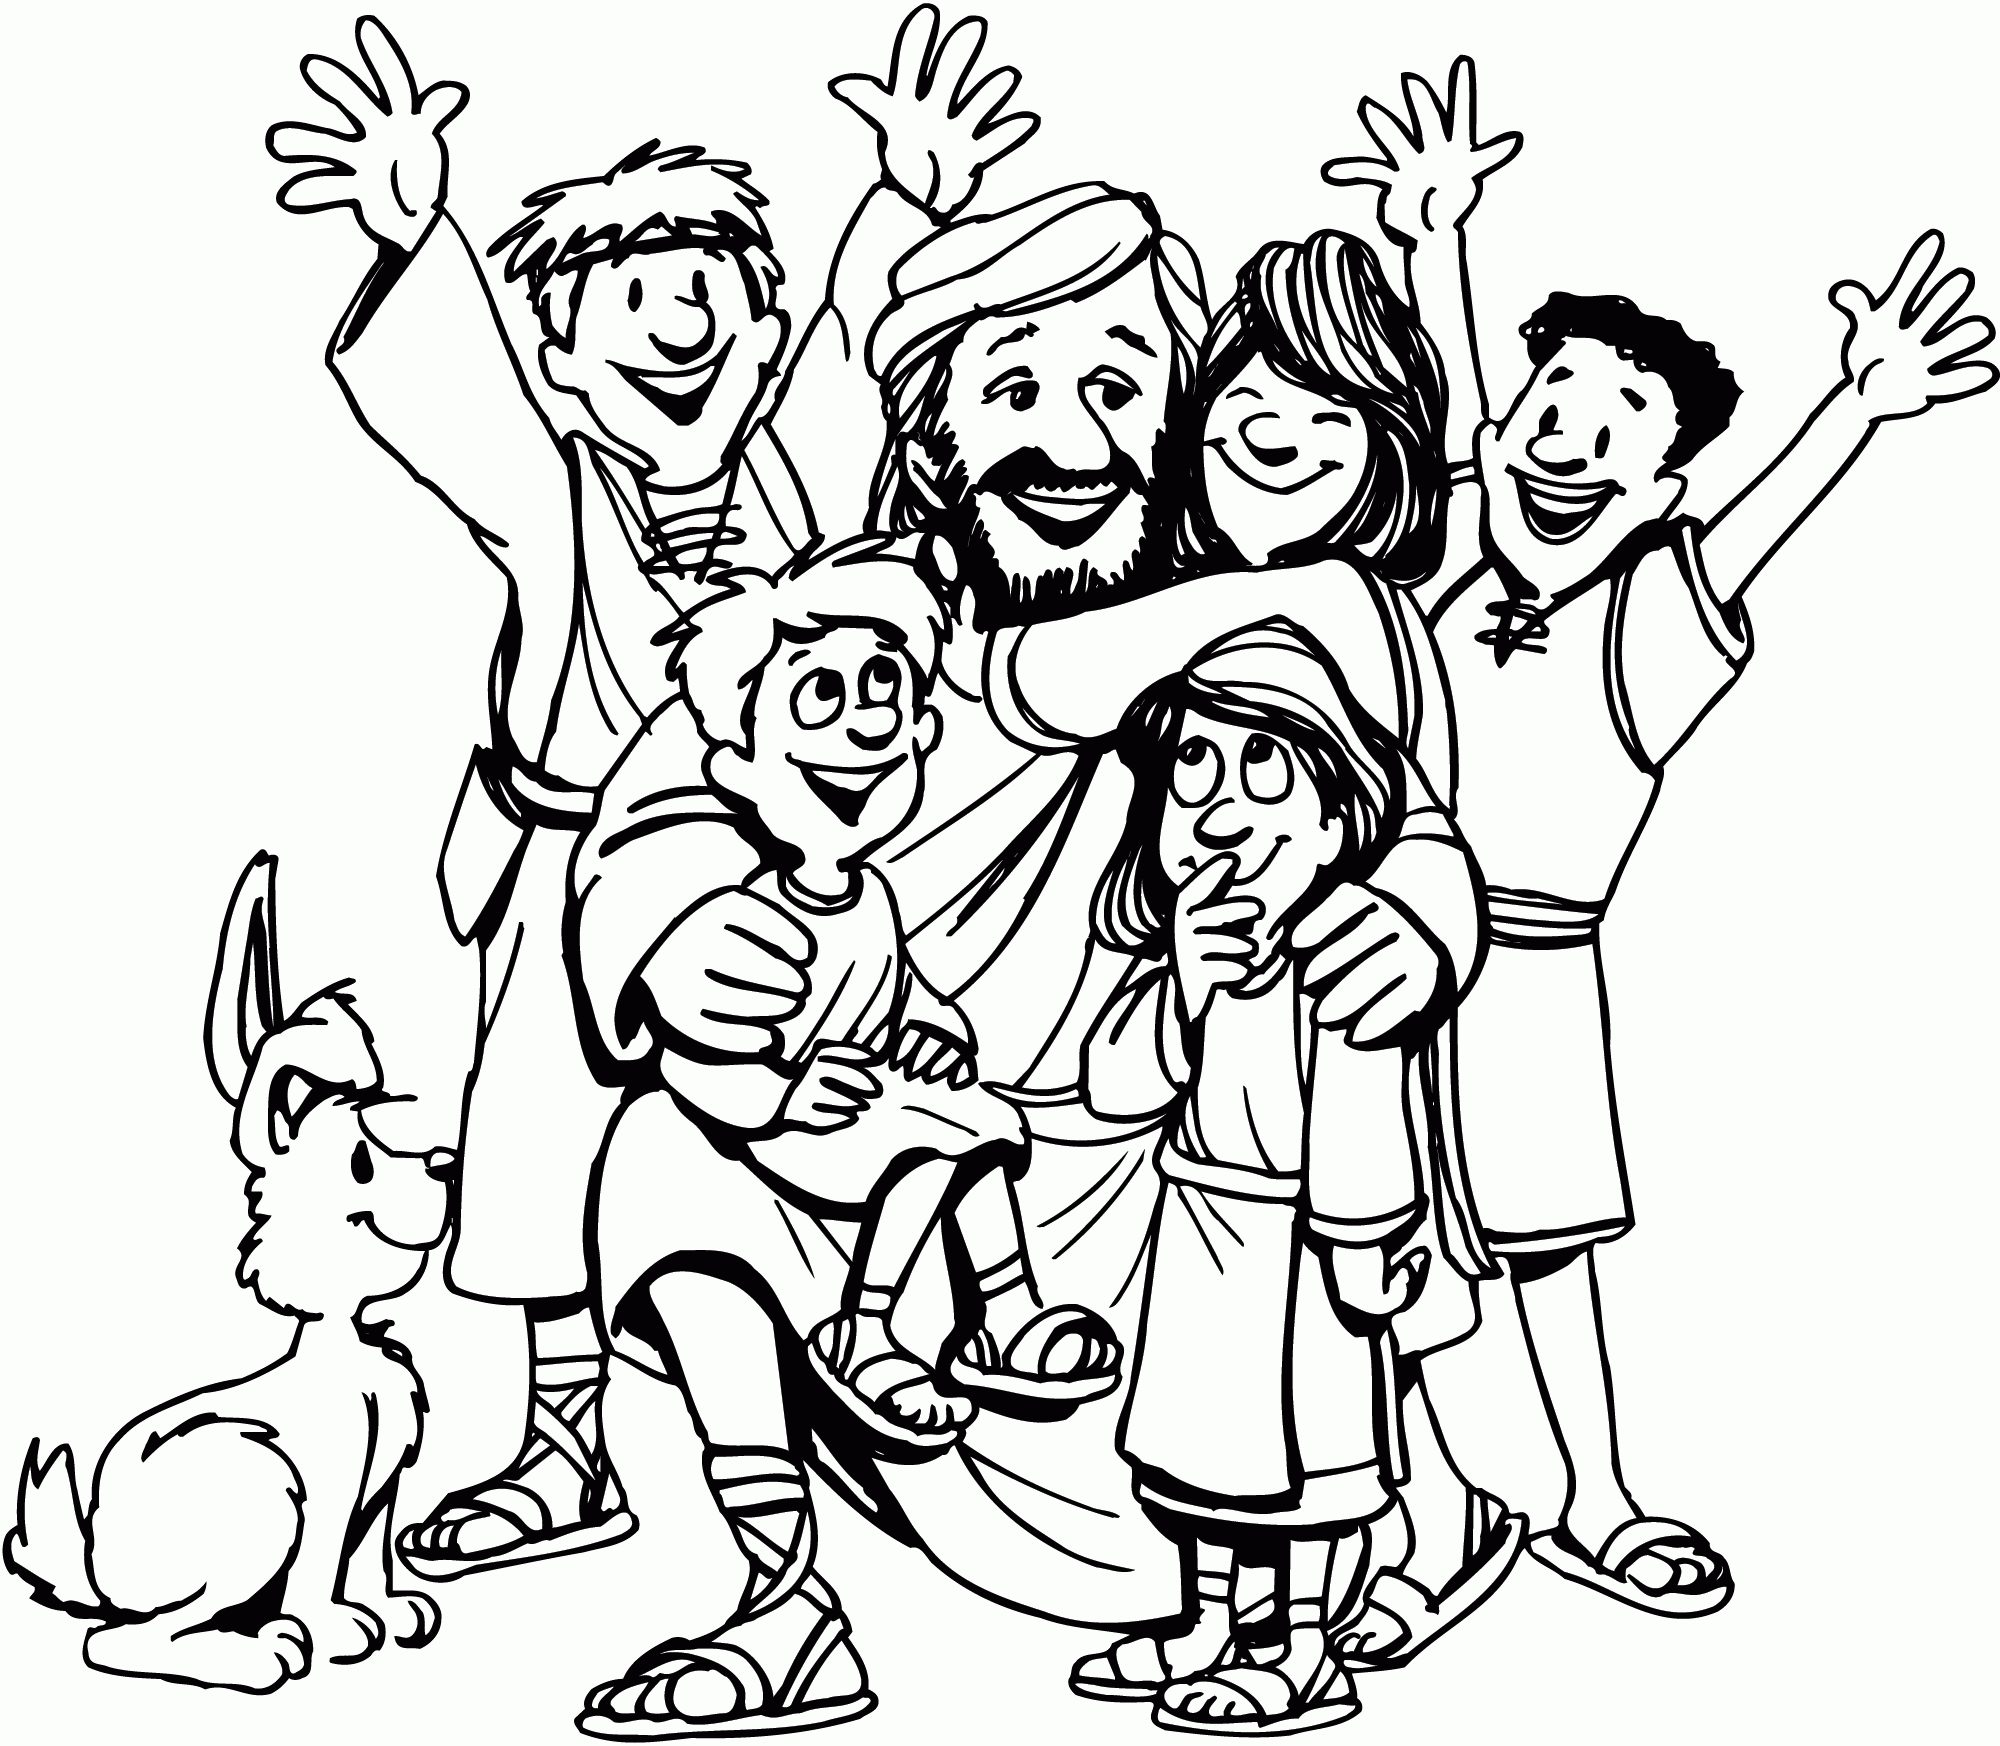 jesus coloring page 為孩子們的著色頁 lord jesus on the throne coloring pages jesus coloring page 